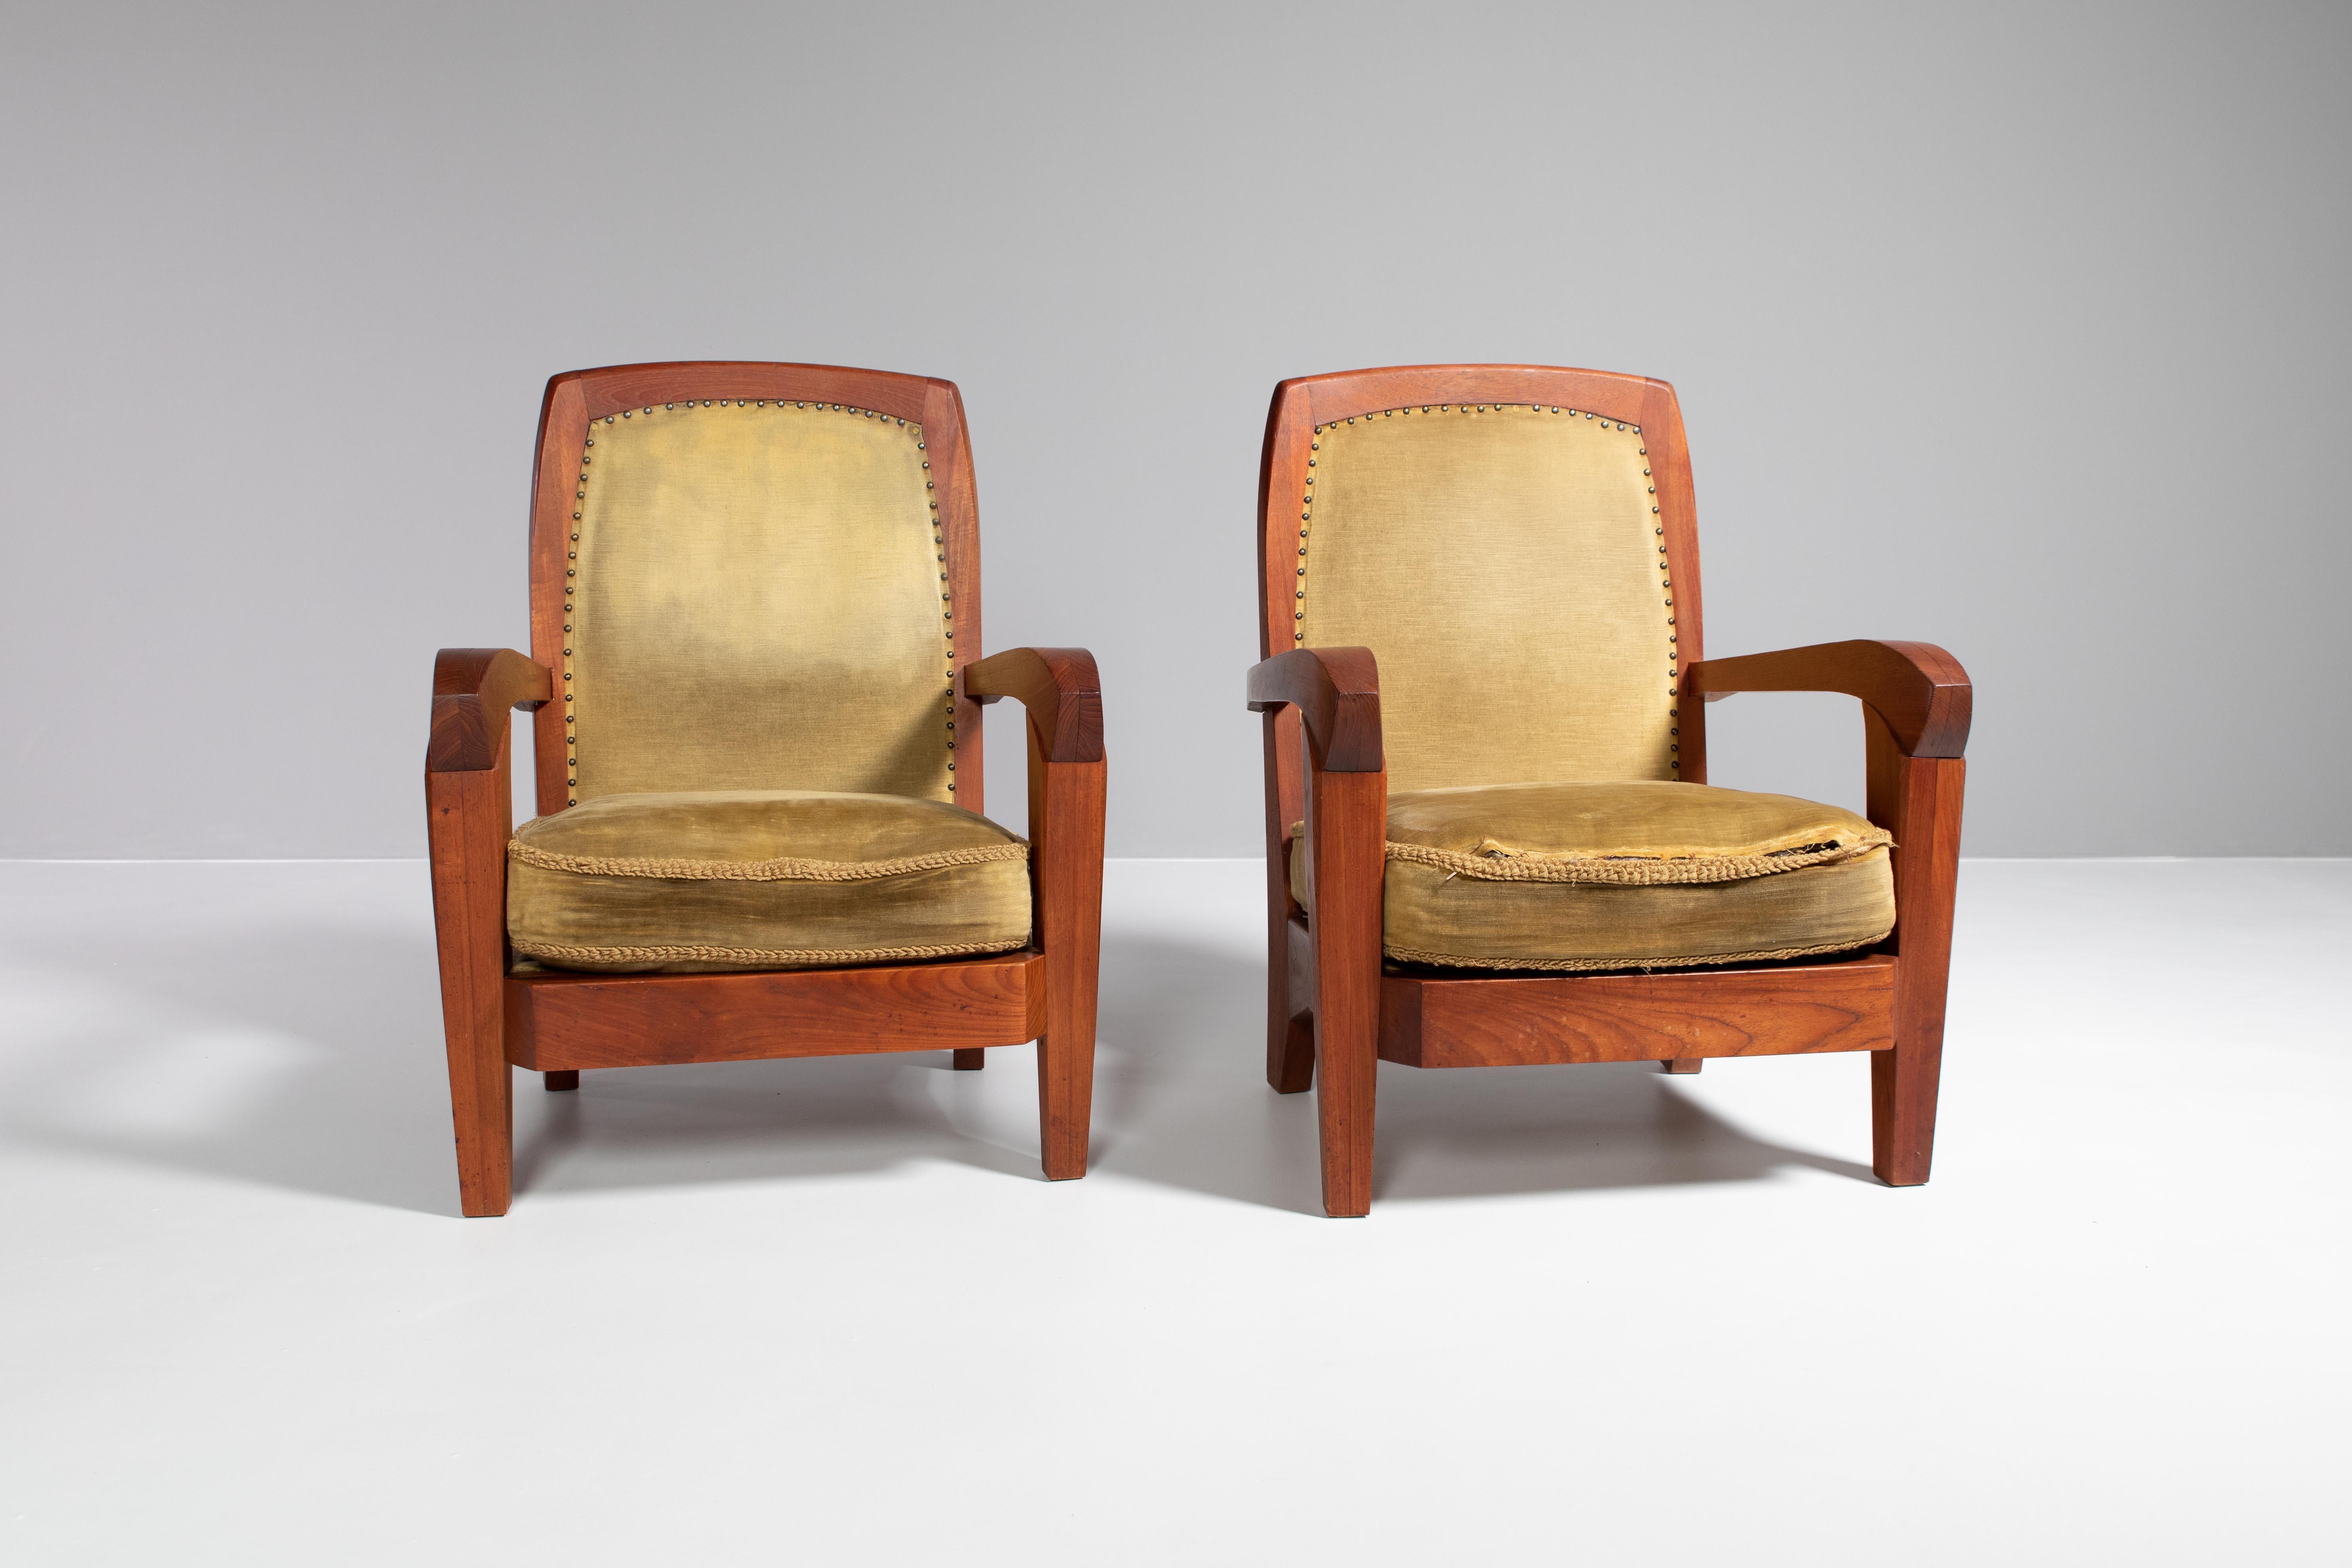 Art Deco Early Anthroposophical Seating Group from the Property of Dirk Jan Metz